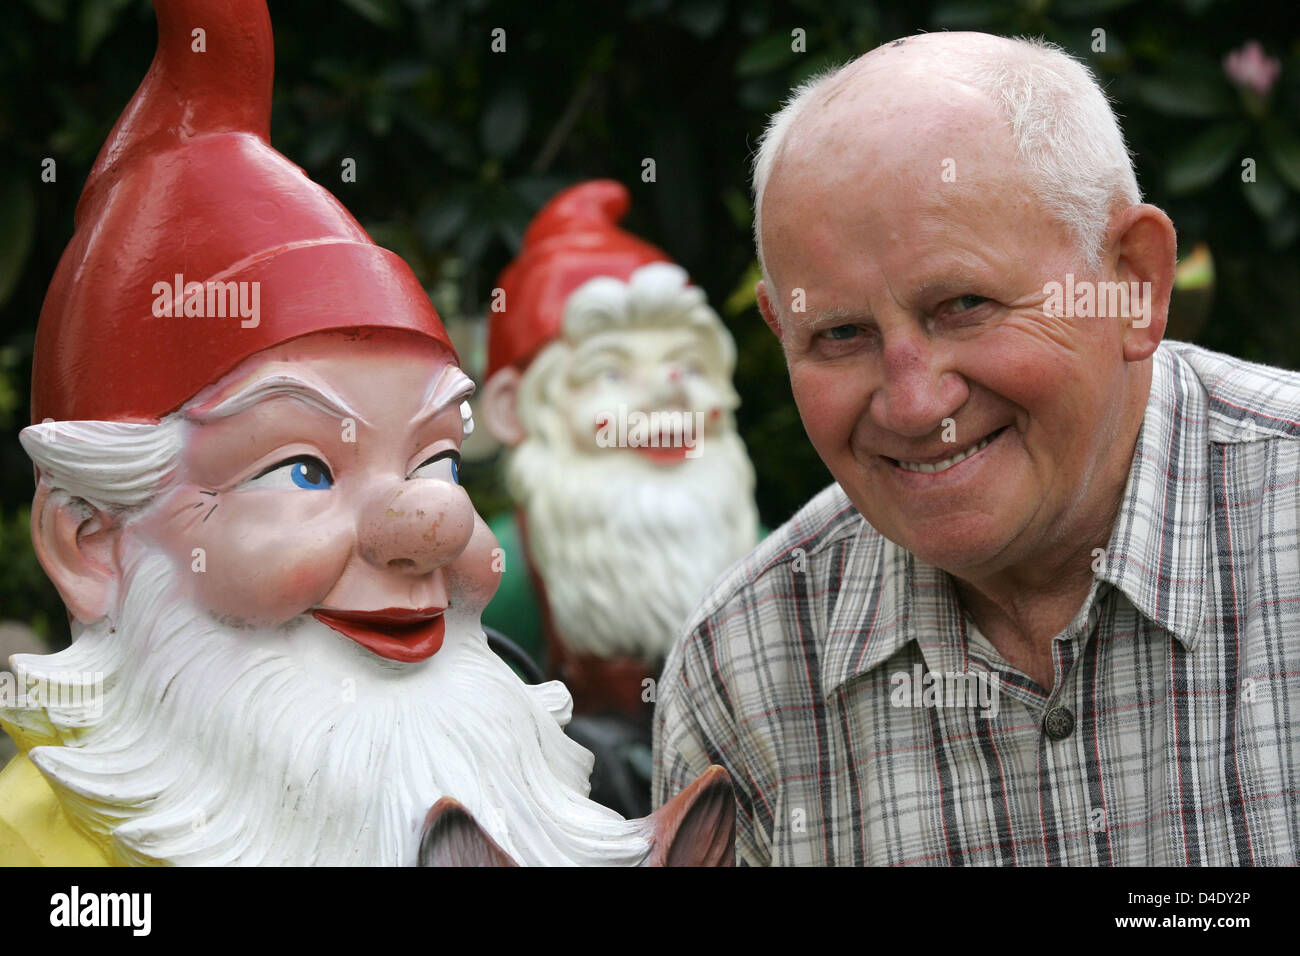 Fritz Luehken Poses Next To One Of His Largest Garden Gnomes In